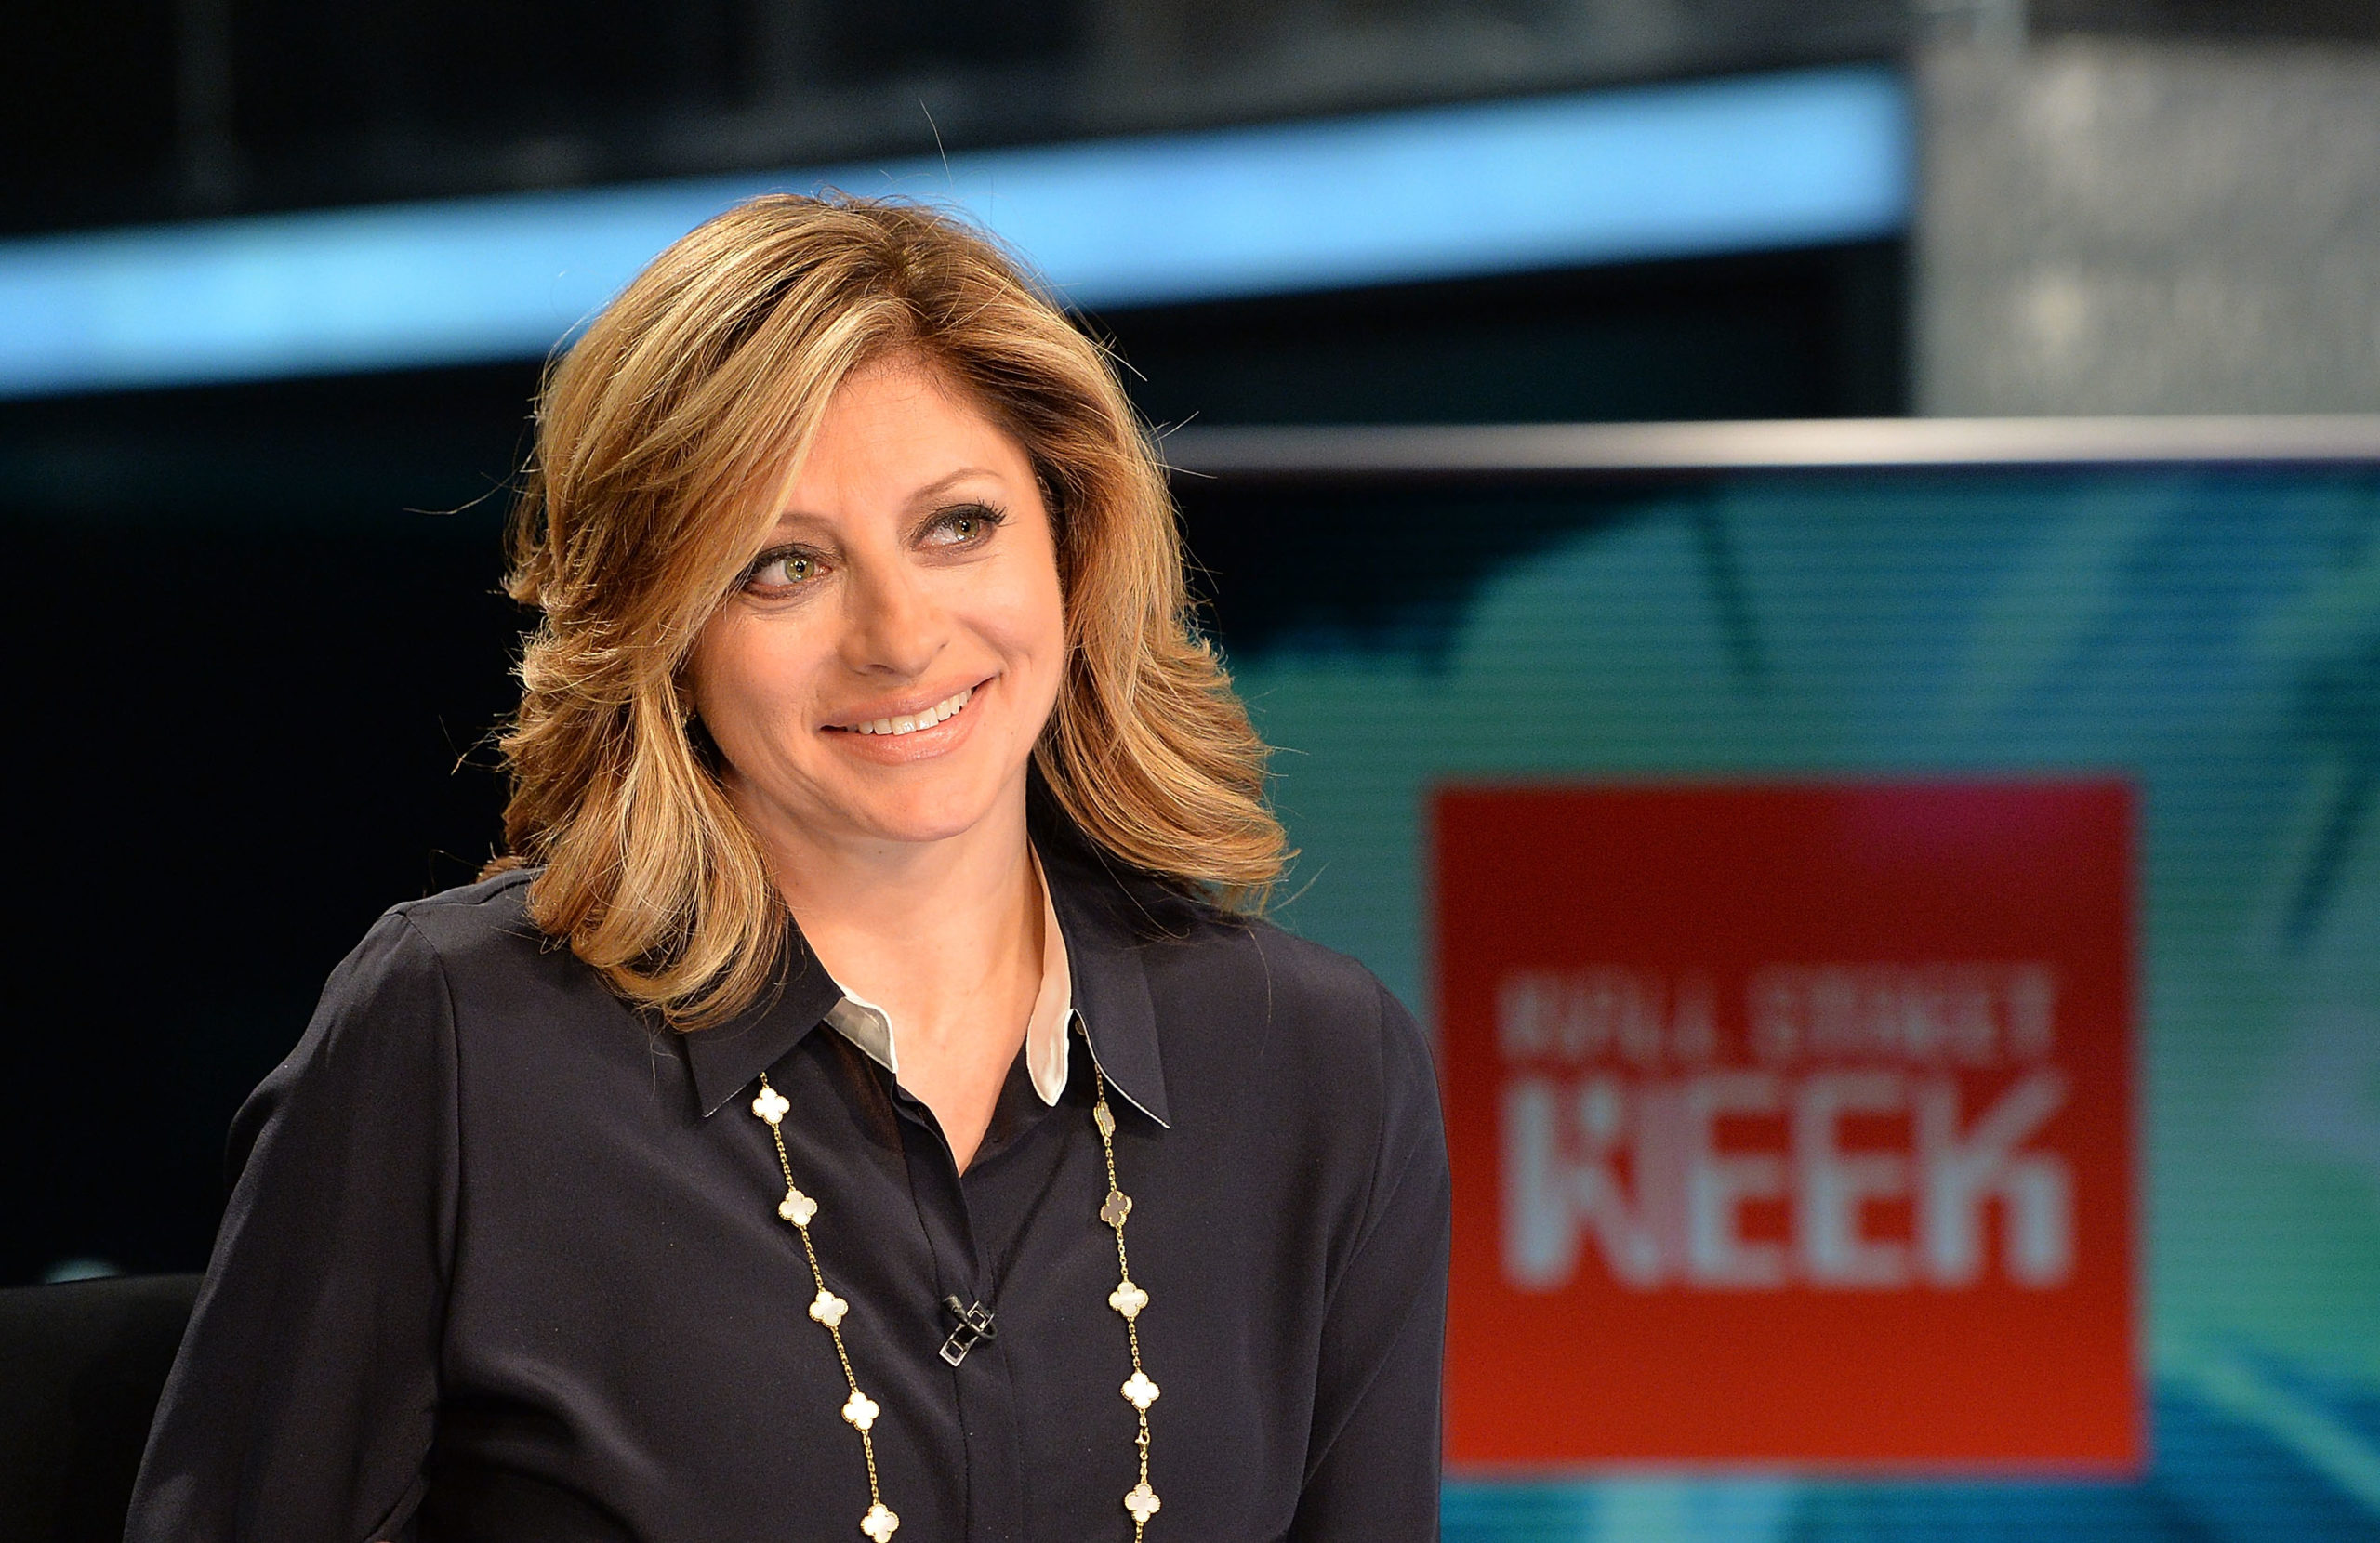 Maria Bartiromo hosts FOX Business Network's "Wall Street Week" at FOX Studios on April 27, 2016 in New York City. (Slaven Vlasic/Getty Images)